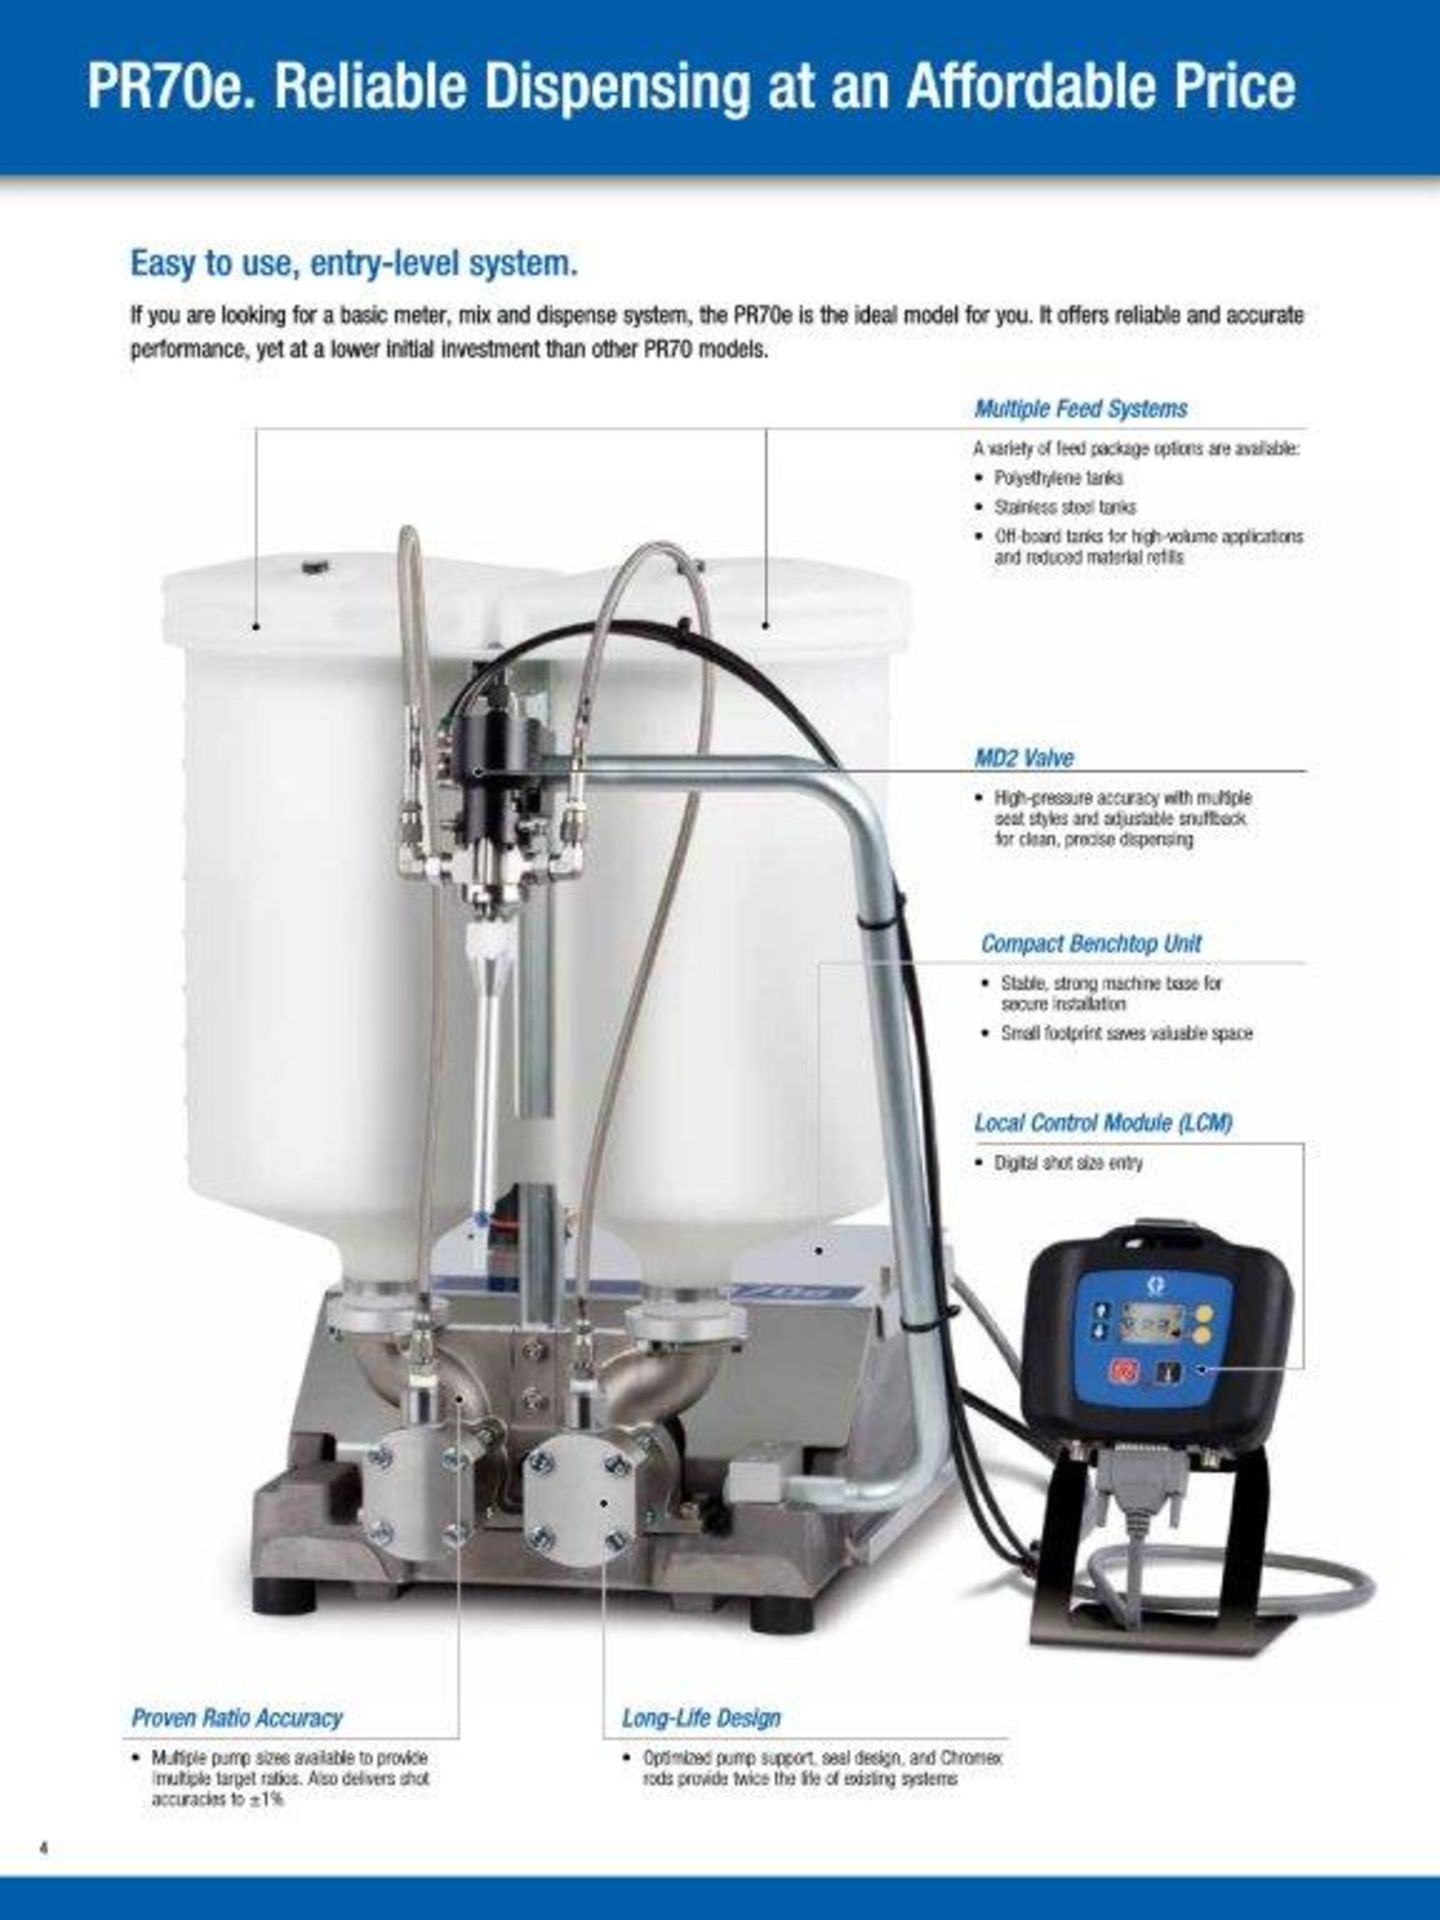 Graco PR70™ Meter, Mix and Dispense Systems (PDF manual available in photos) - Image 11 of 15